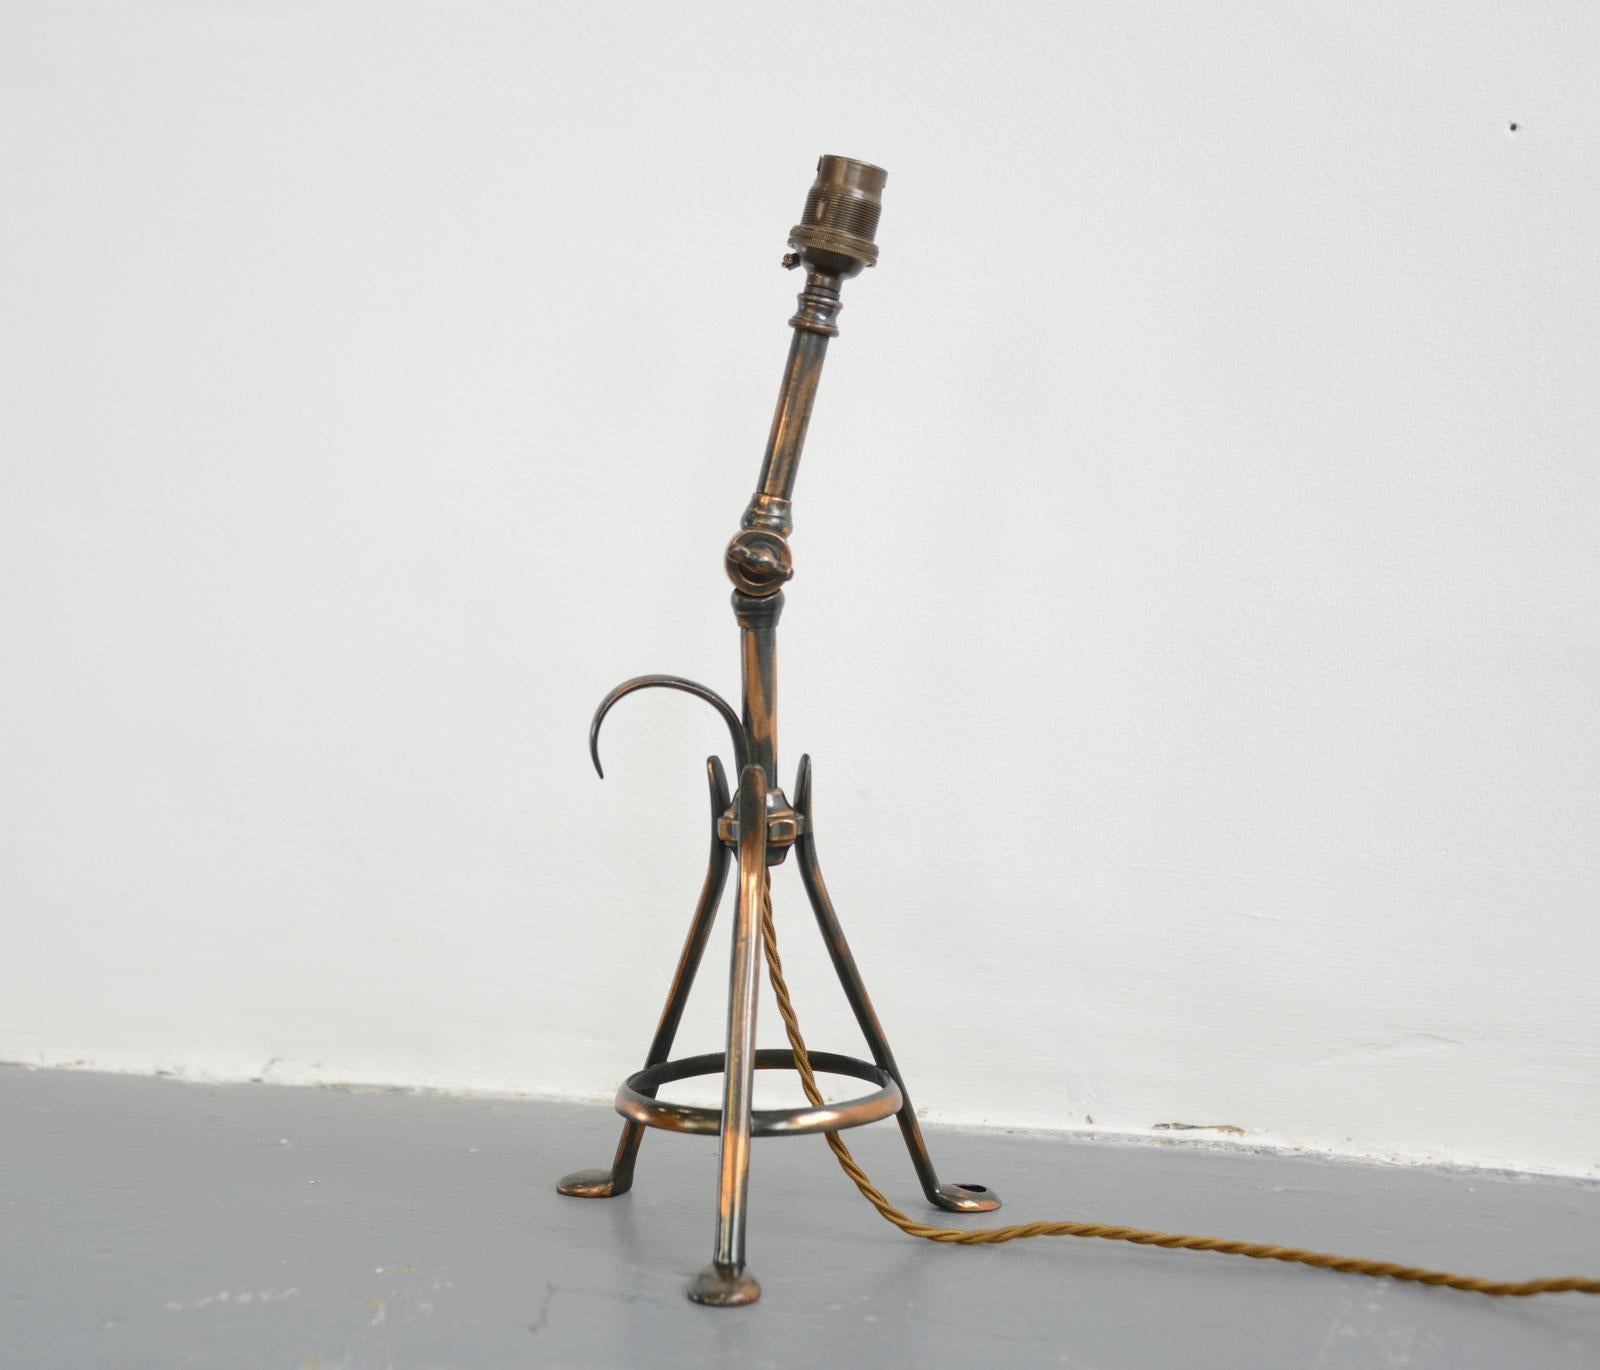 Table lamp by James Hinks & Sons, circa 1900

- Copper flash finish
- Takes B22 fitting bulbs
- Adjustable arm
- Can be used as a table or wall light
- English ~ 1900
- Measures: 38cm tall x 16cm wide x 16cm wide

Condition report

Fully